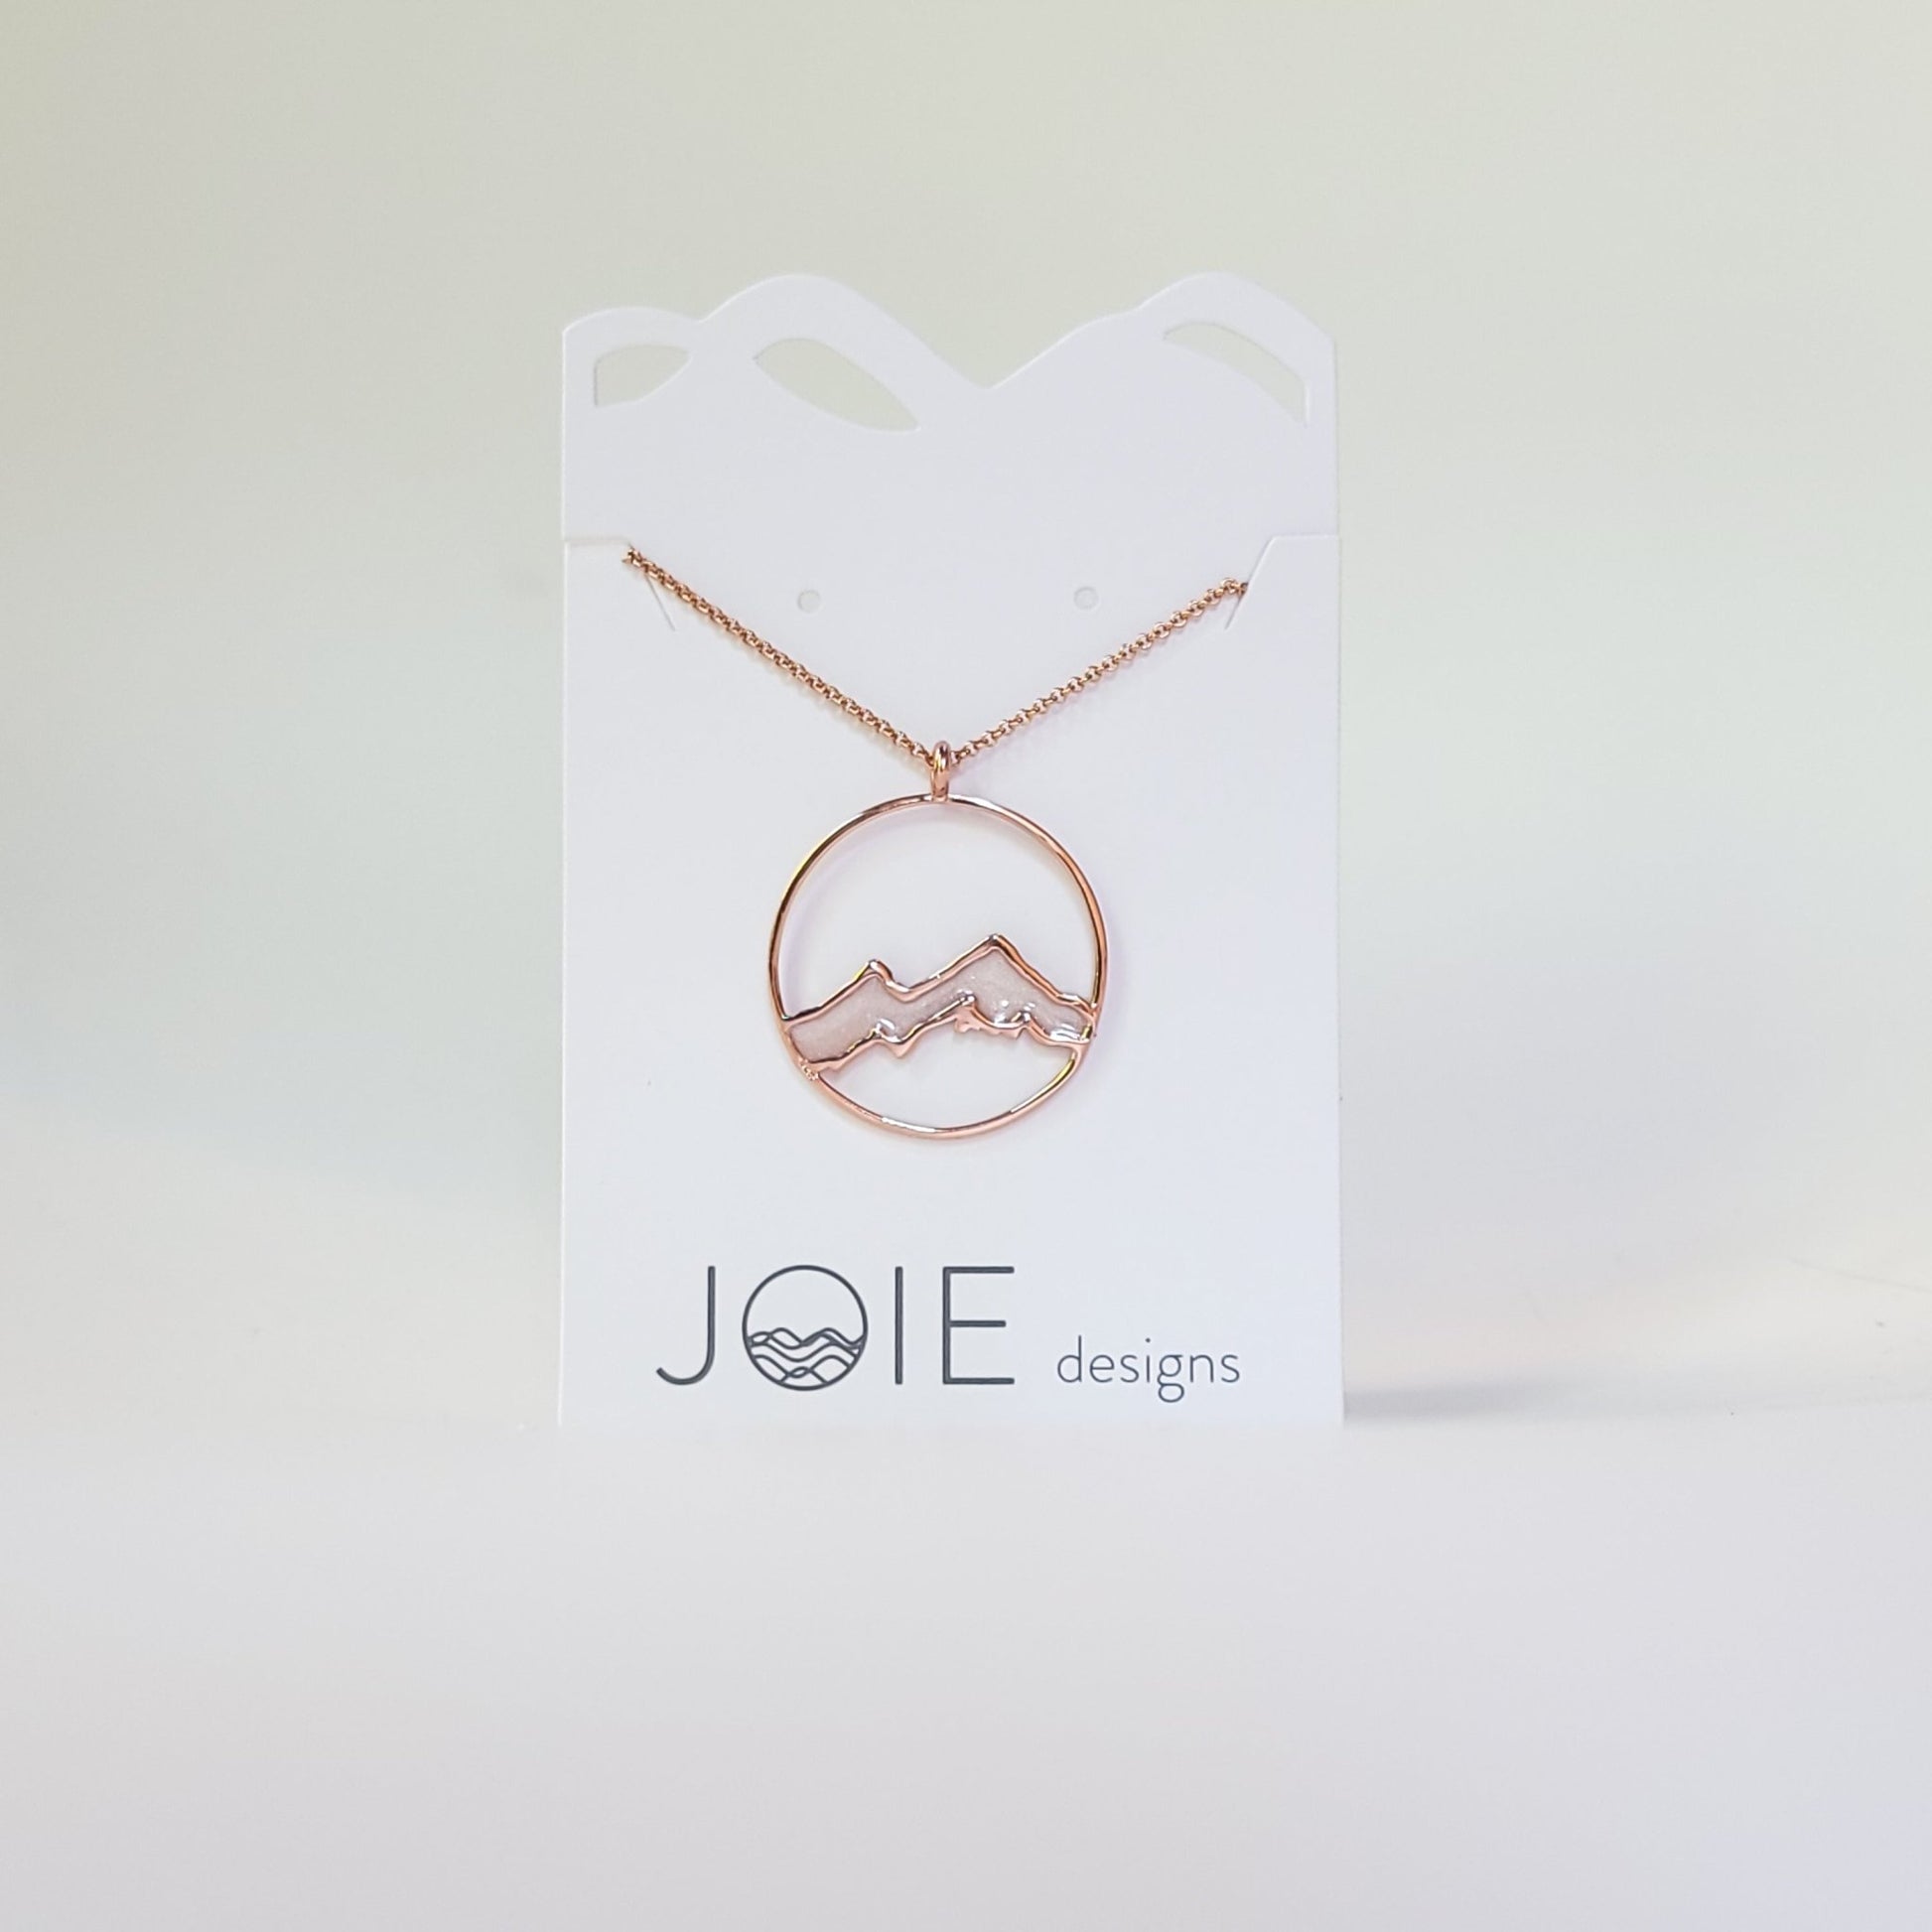 Embellished Alpenglow Mountain Necklace resin and rose gold plated silver